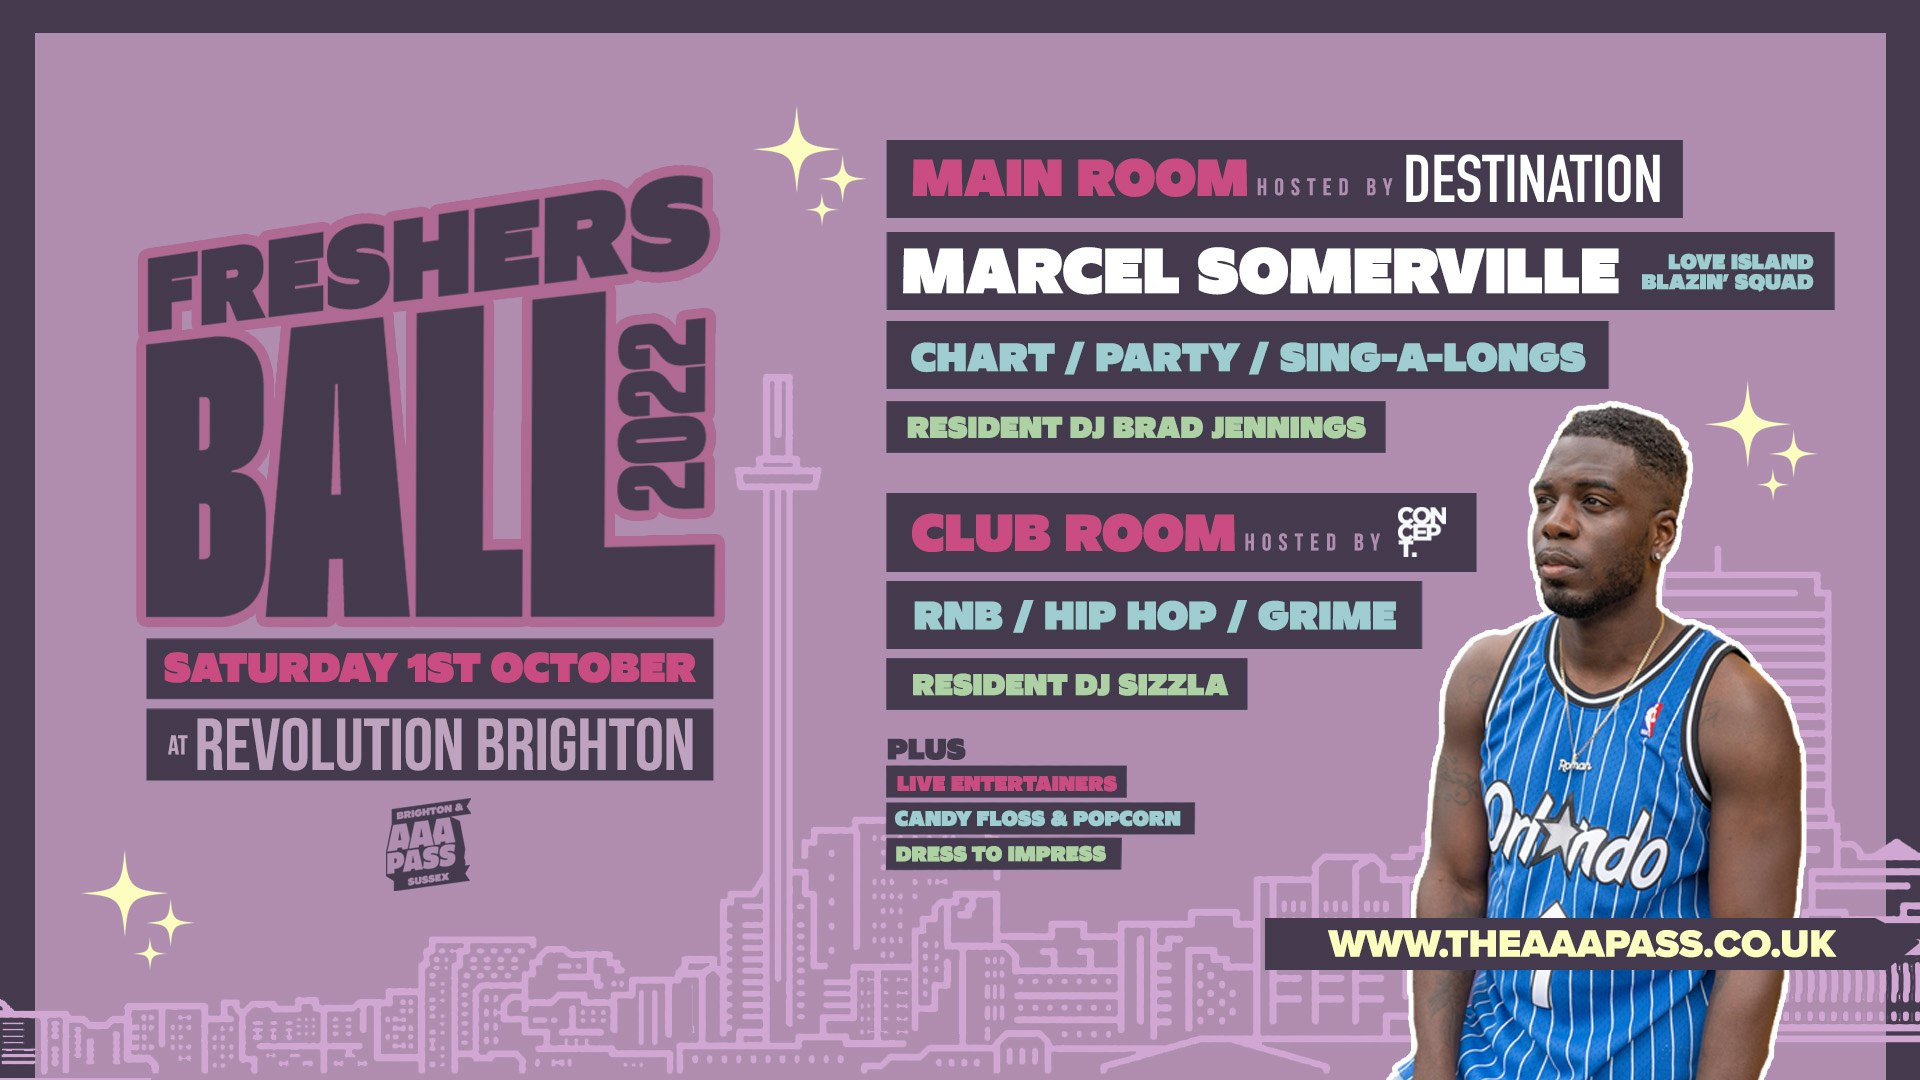 Freshers Ball 2022 hosted by Love Island & Blazin’ Squad’s Marcel | FREE with AAA Pass